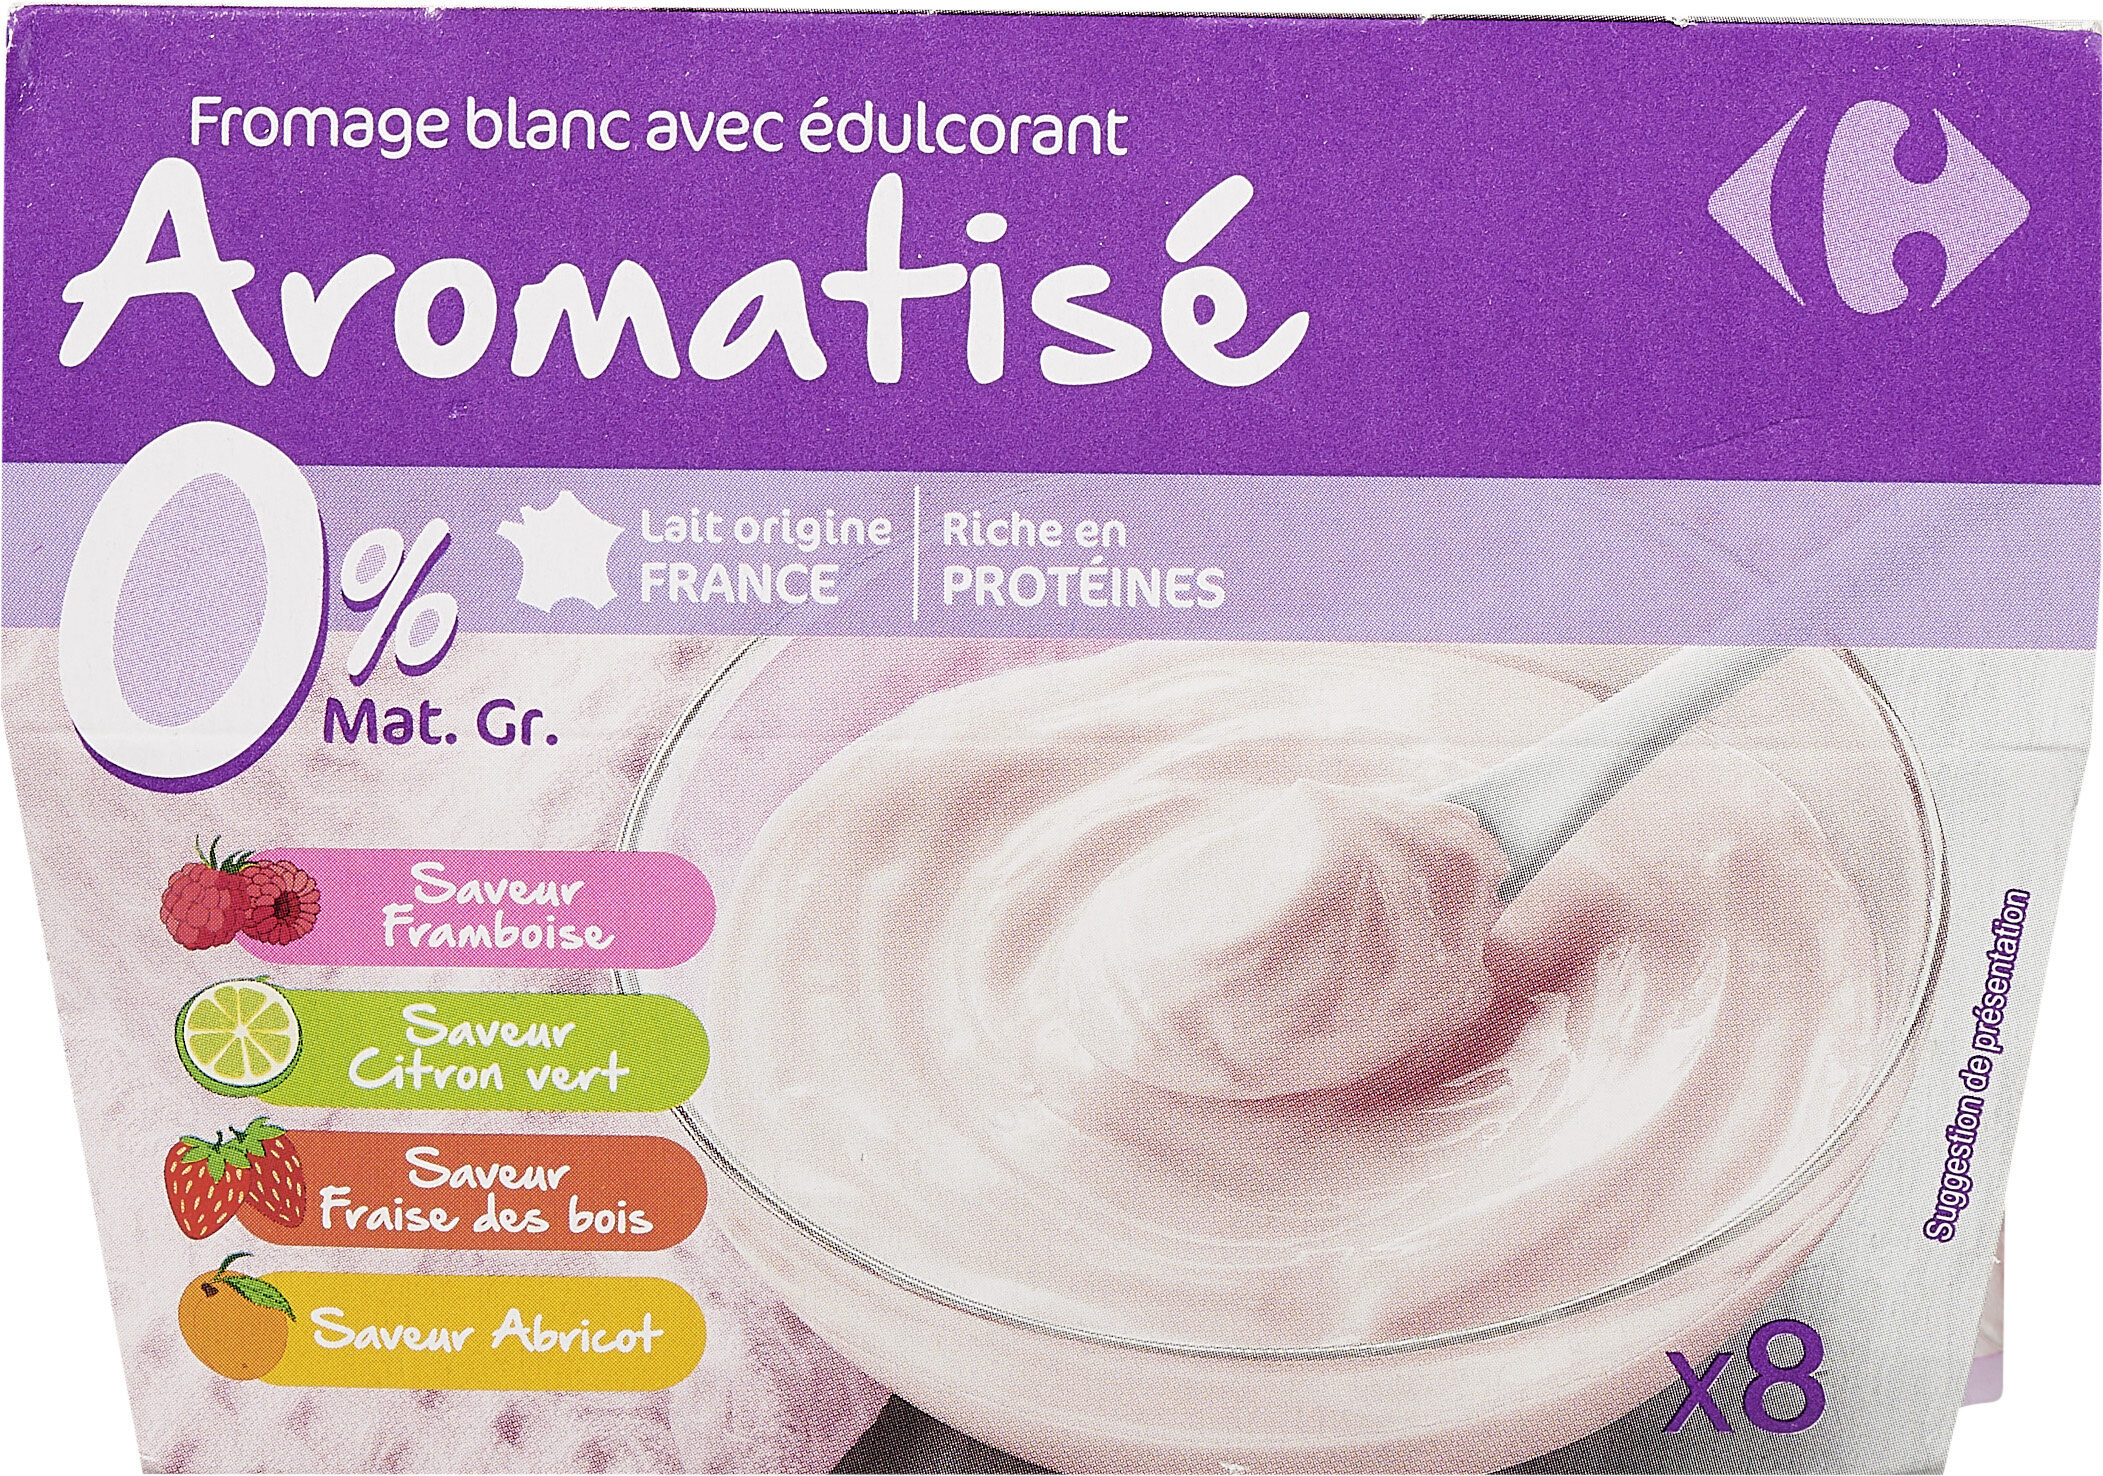 Fromage blanc aromatise - Product - fr